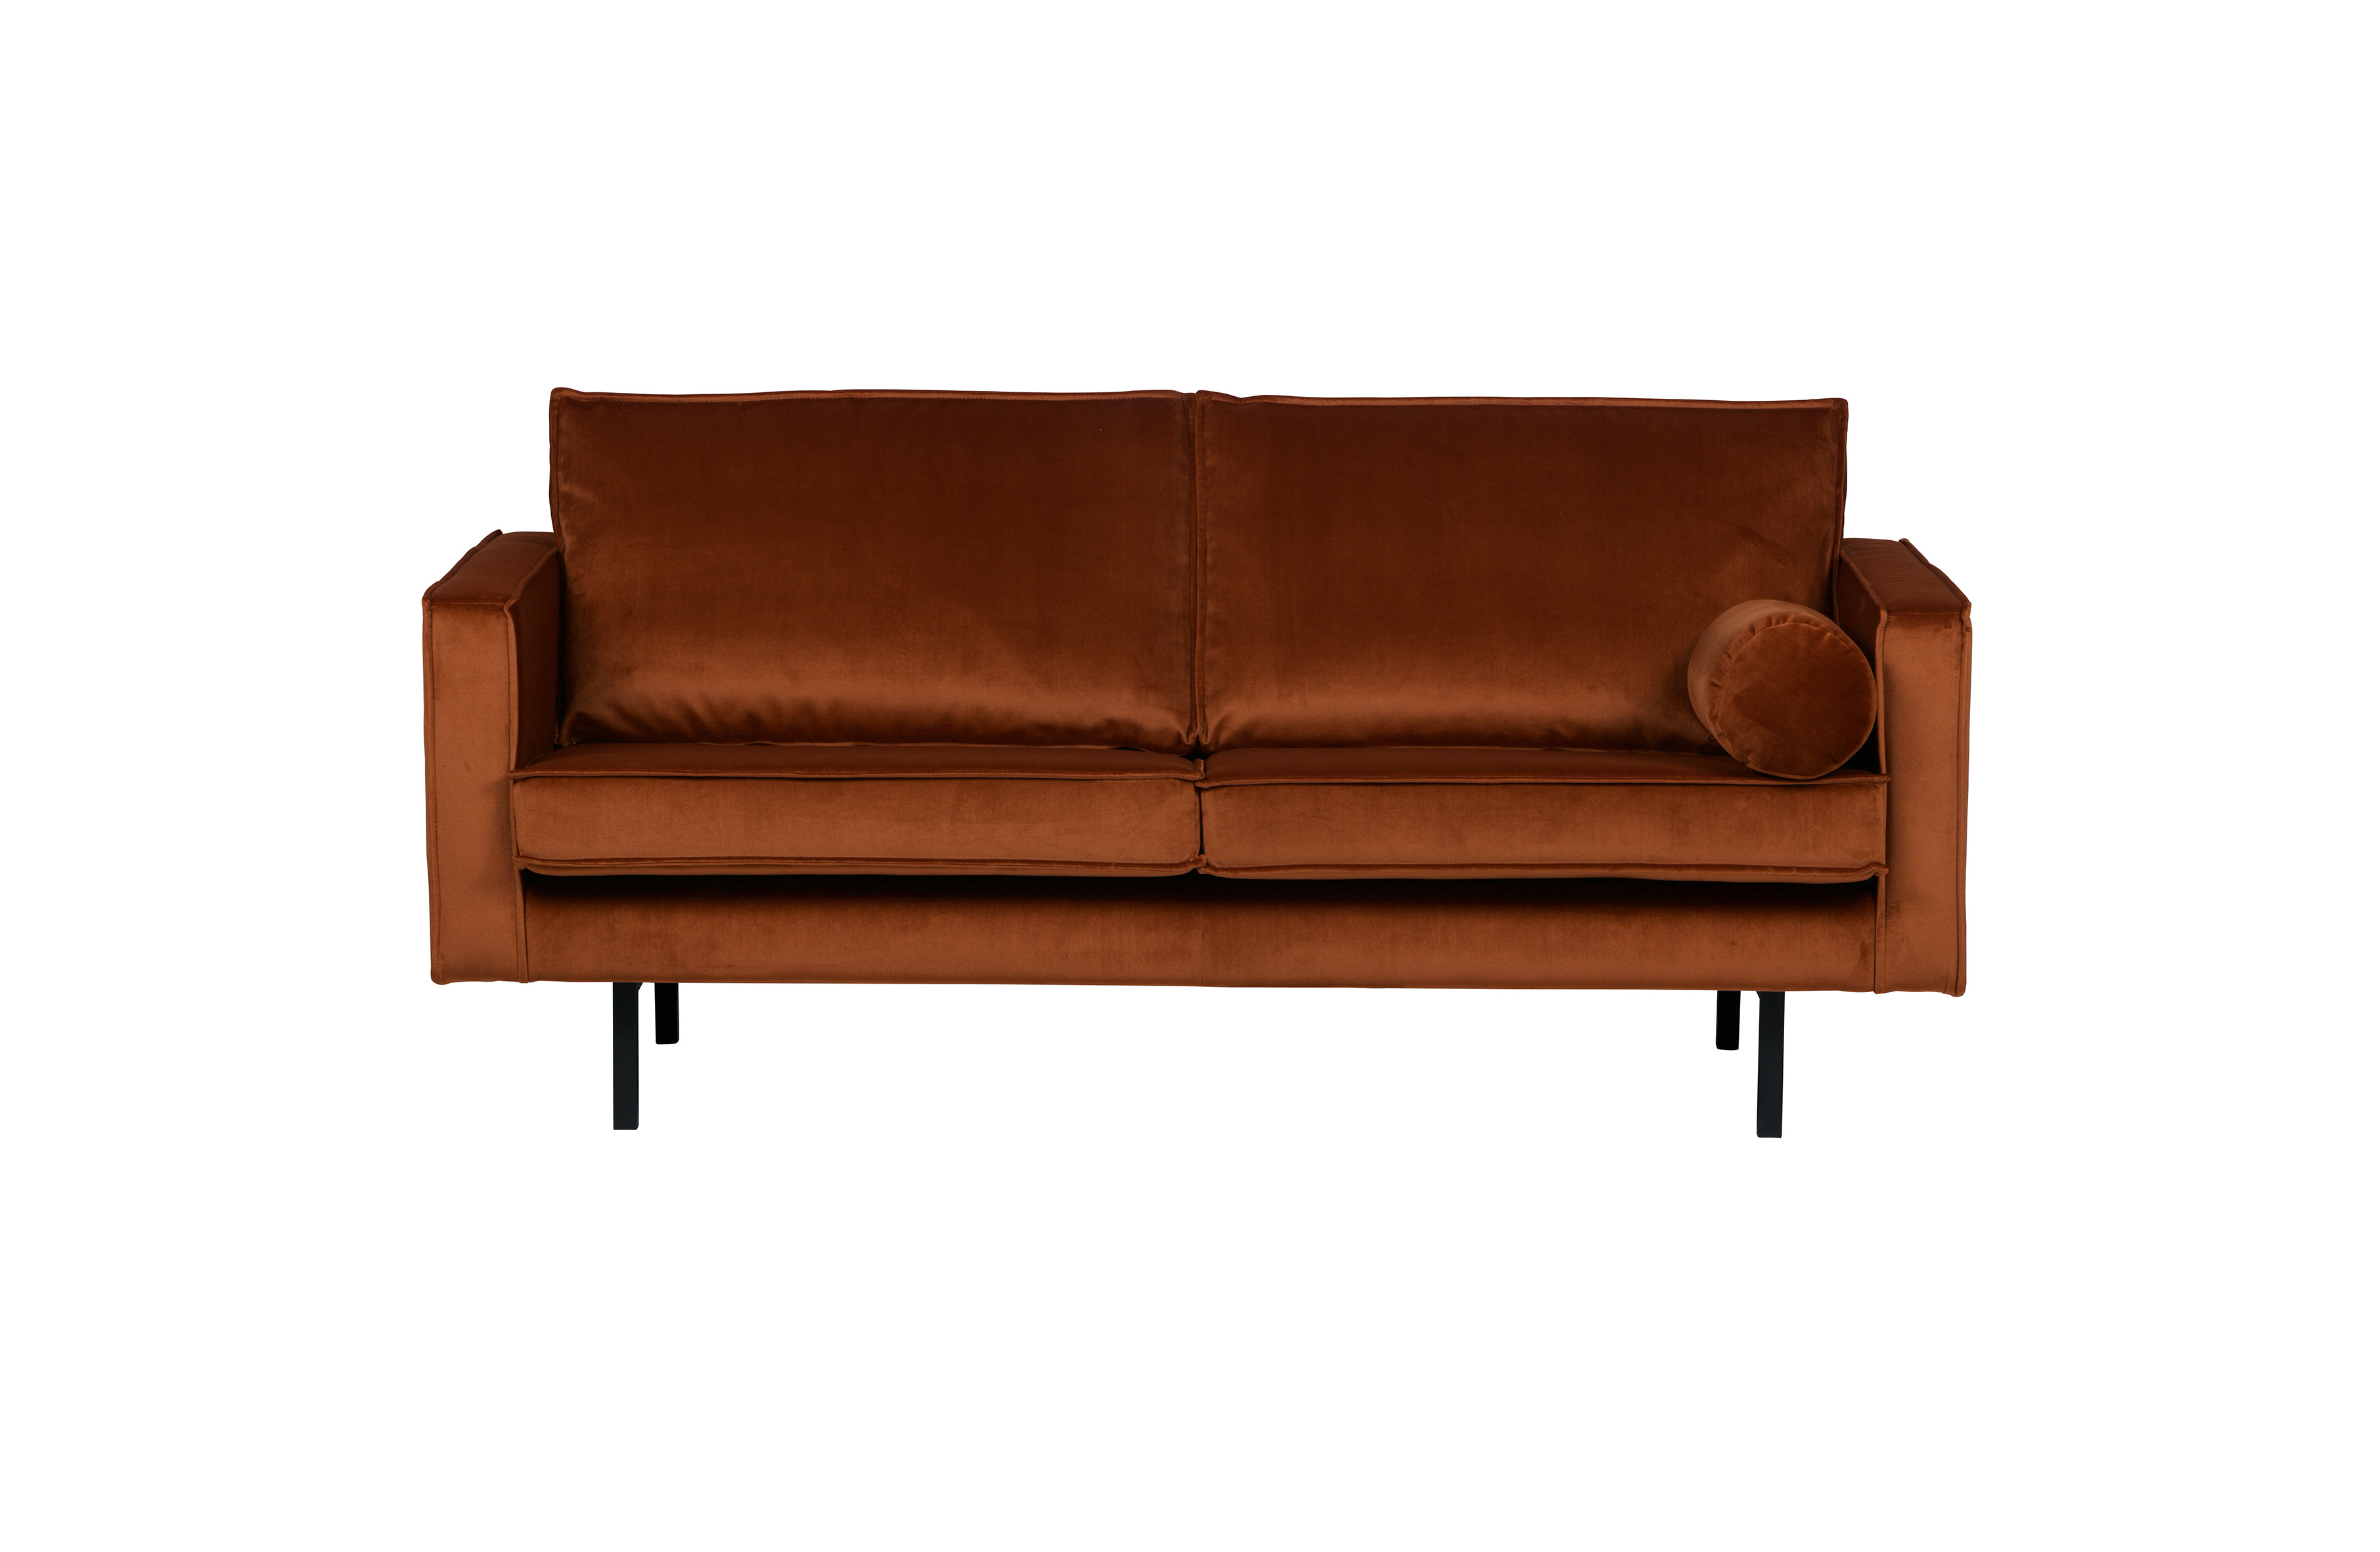 Rent a Sofa 25 seater Rodeo rust? Rent at KeyPro furniture rental!